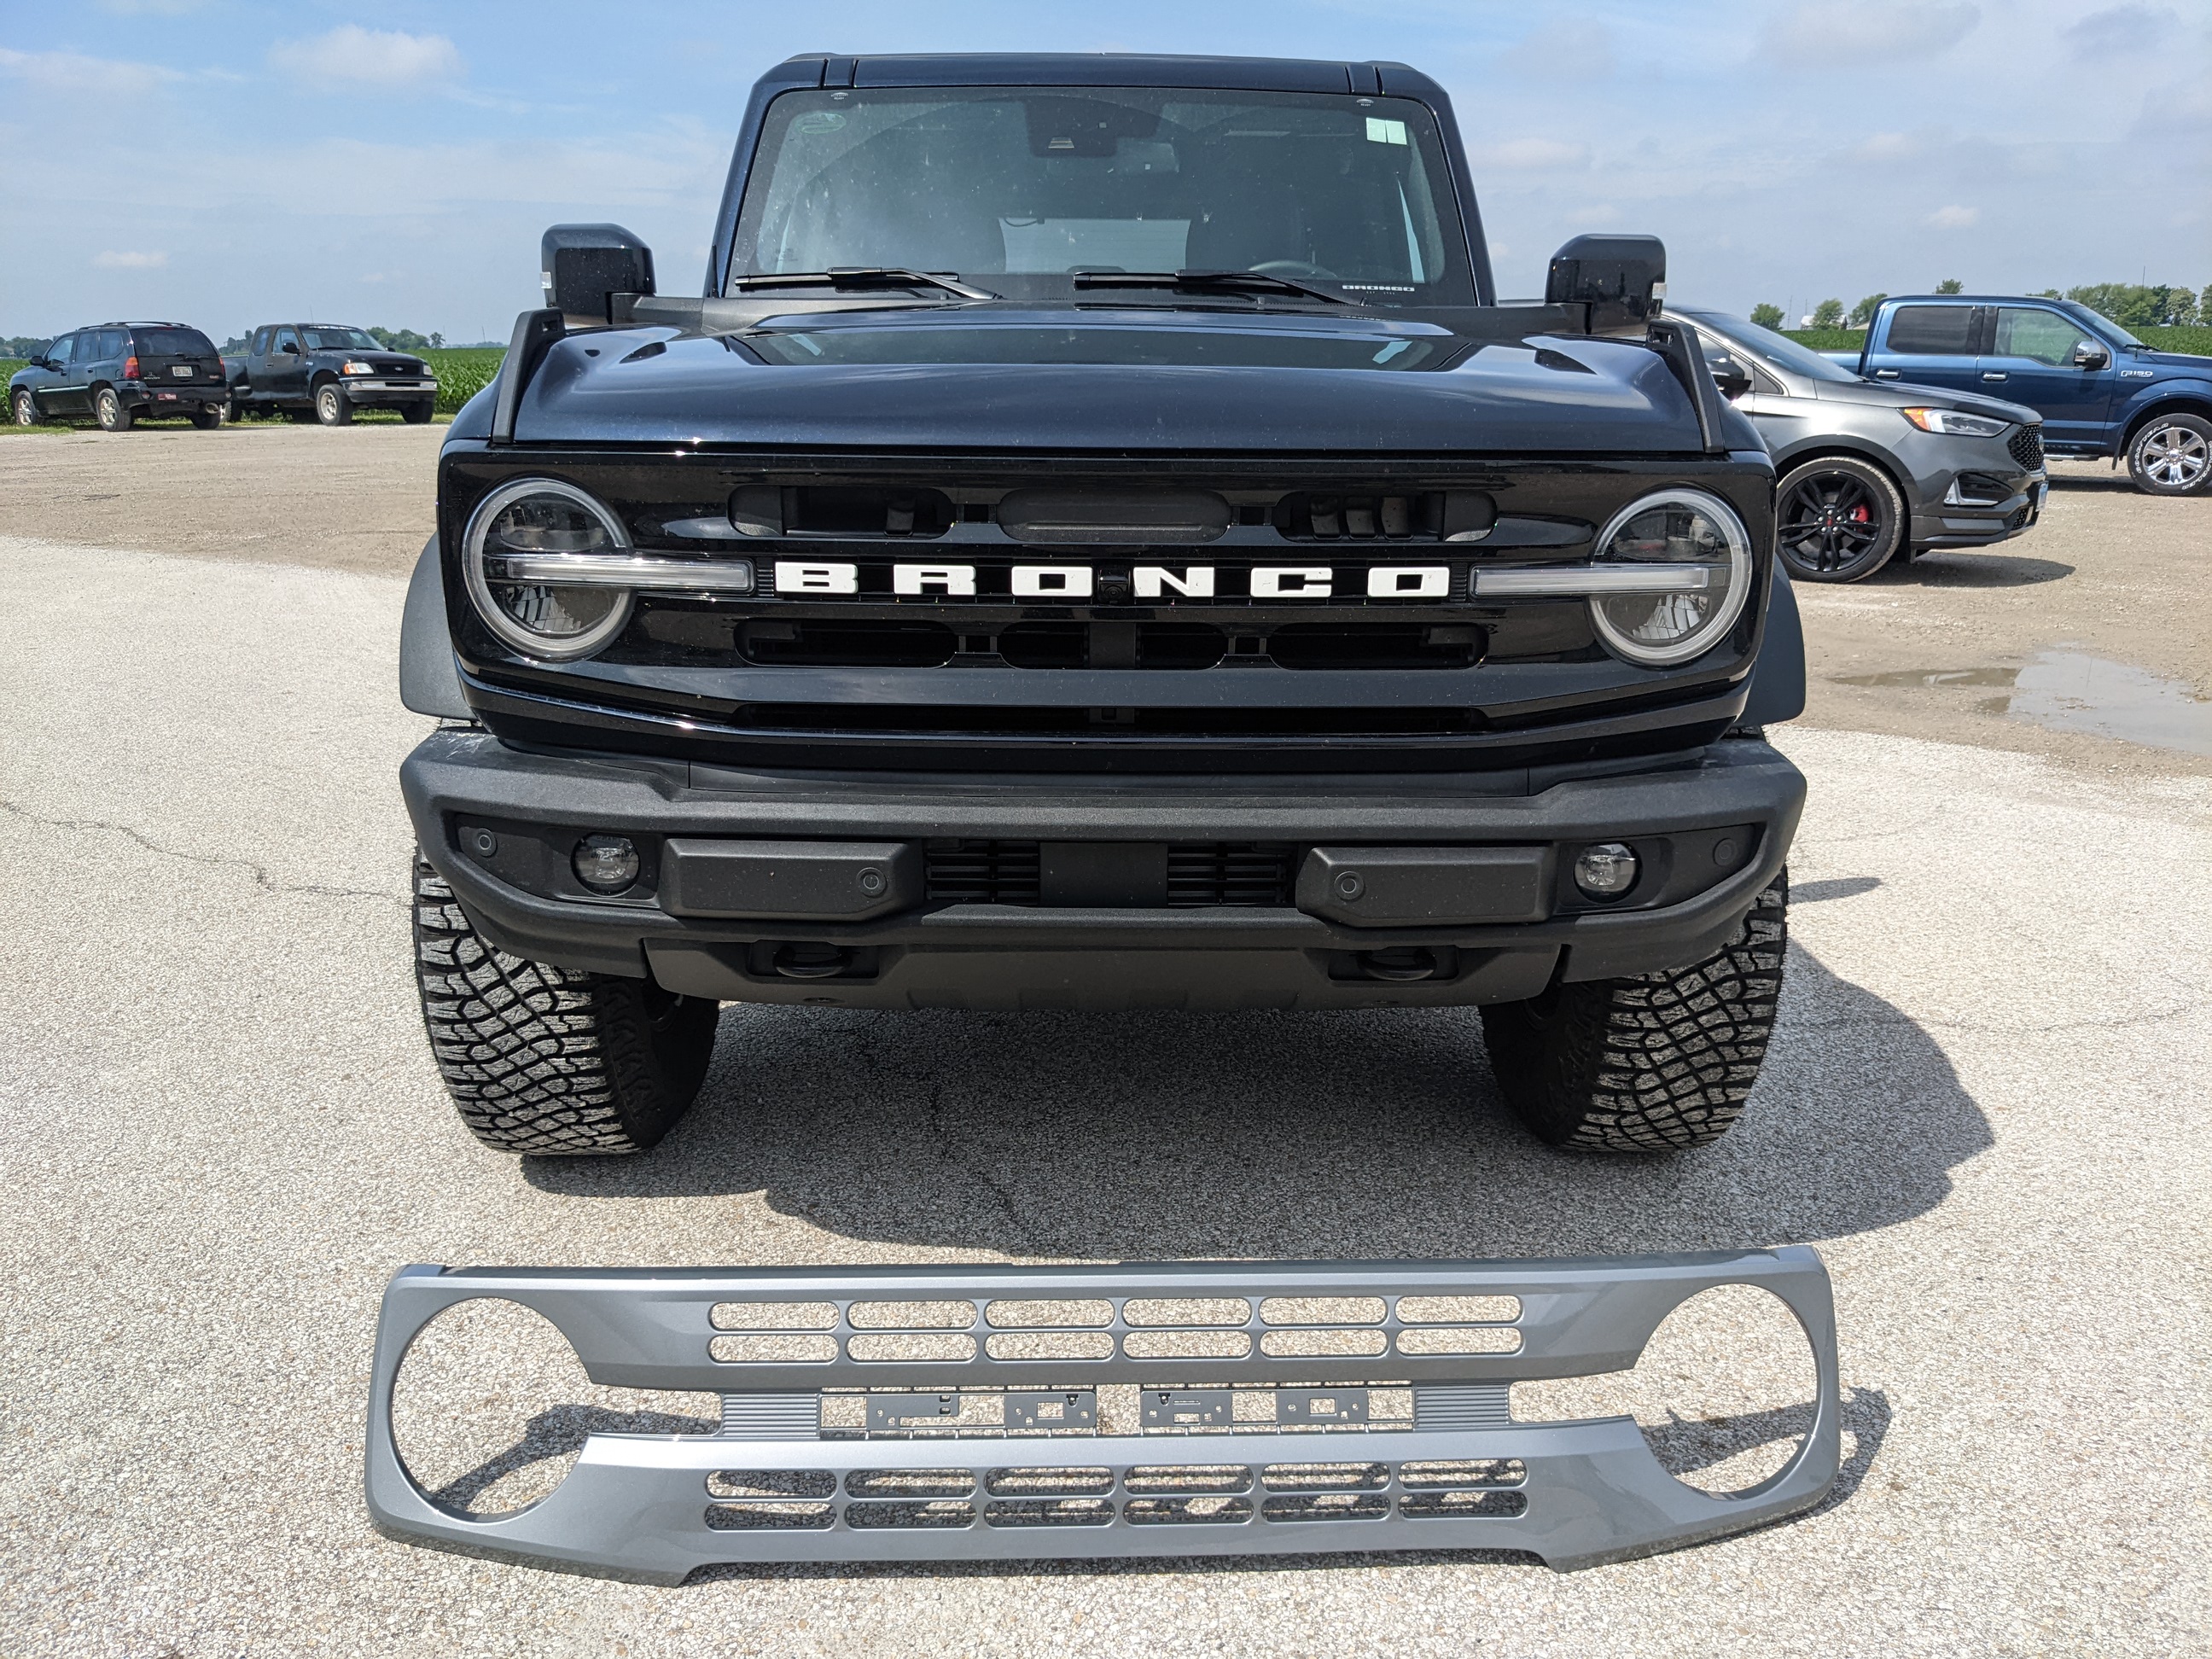 Custom Heritage Grill in Solar Silver + Oracle letter lights added to my Bronco! Bronco6G